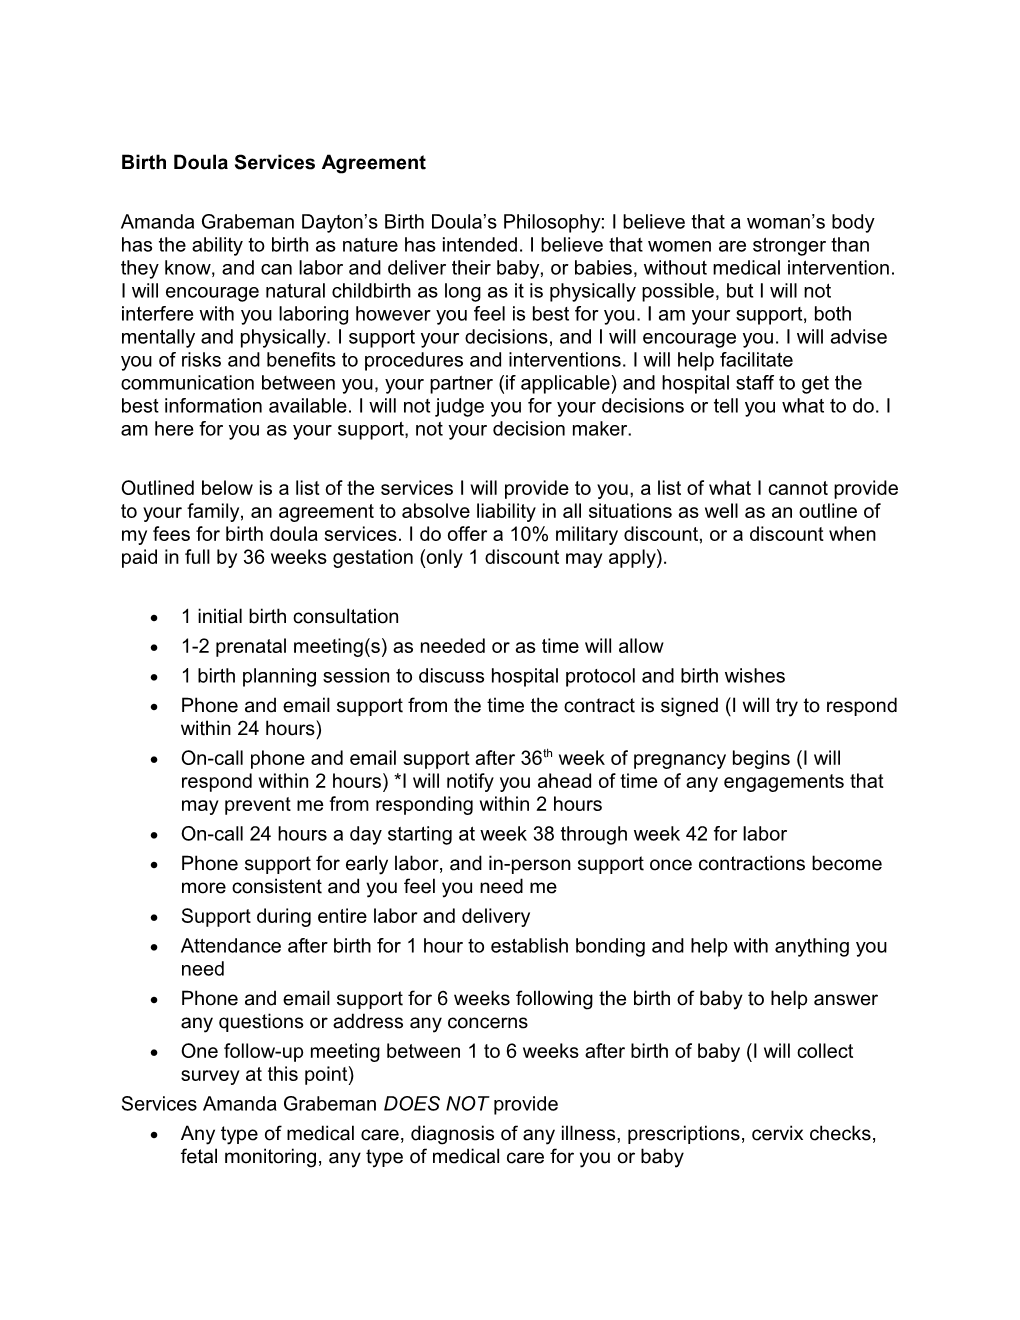 Birth Doula Services Agreement